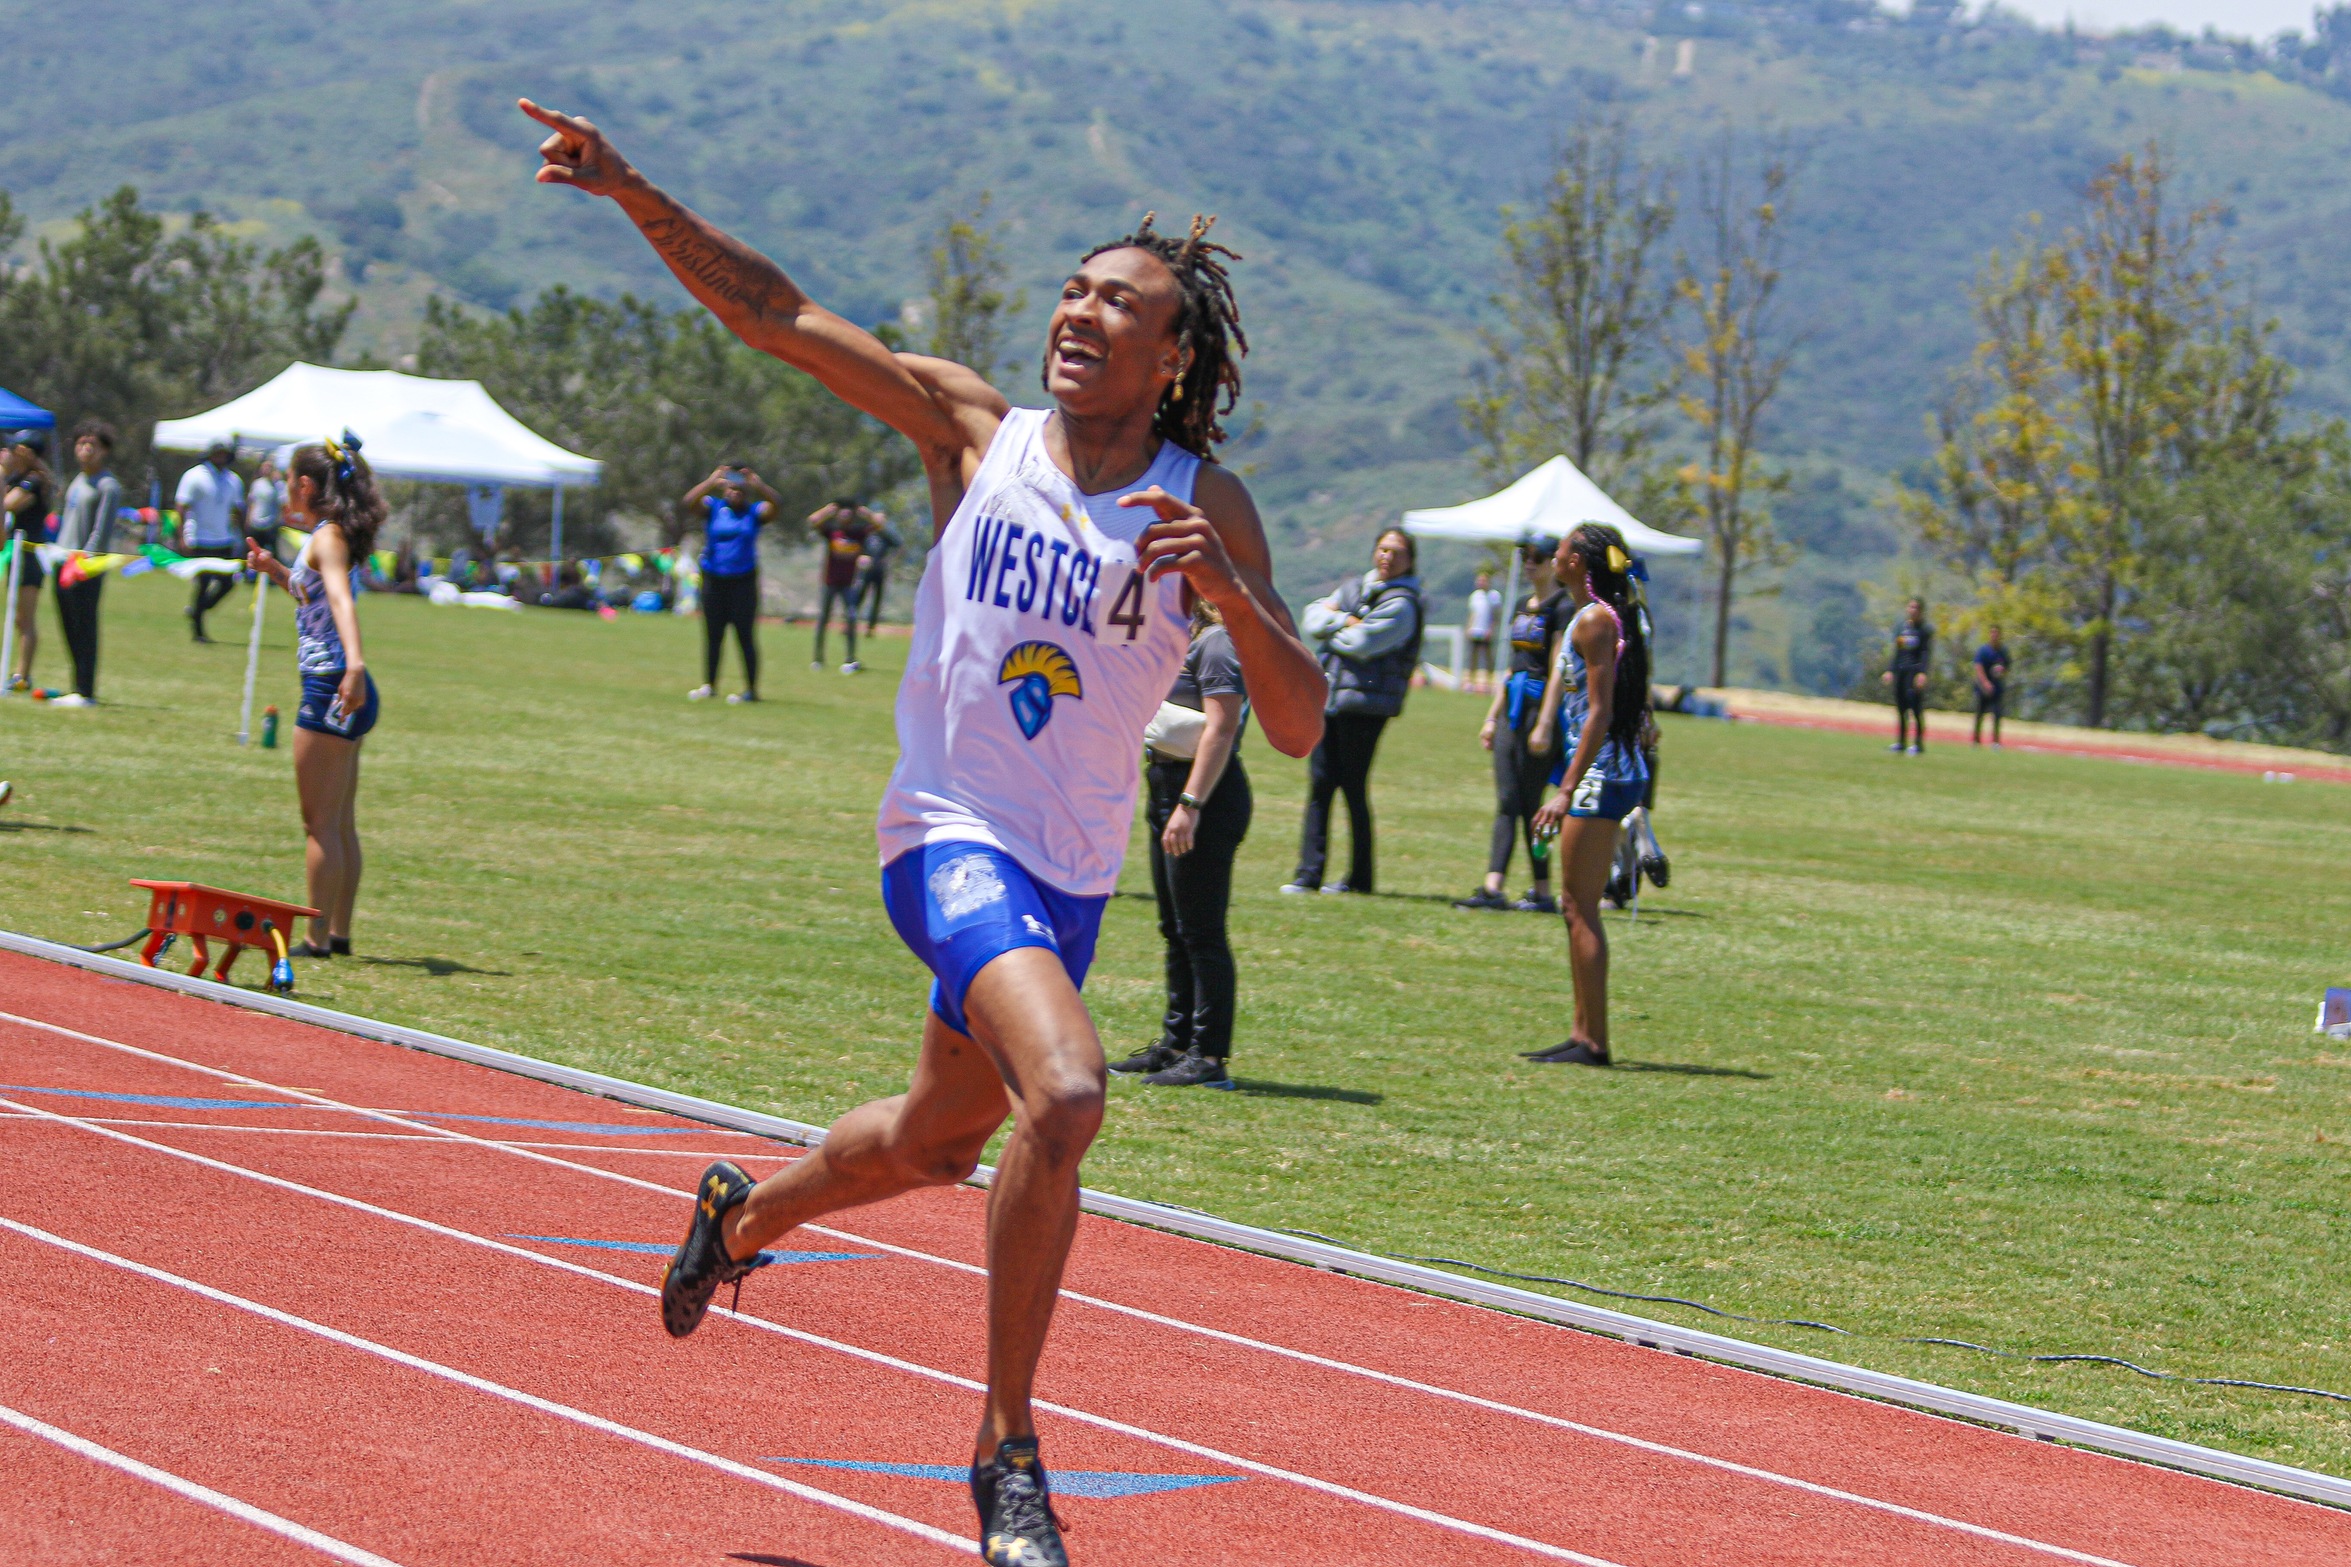 Harrison Horner wins the 400M in style. Photo by Adrian Wilson.